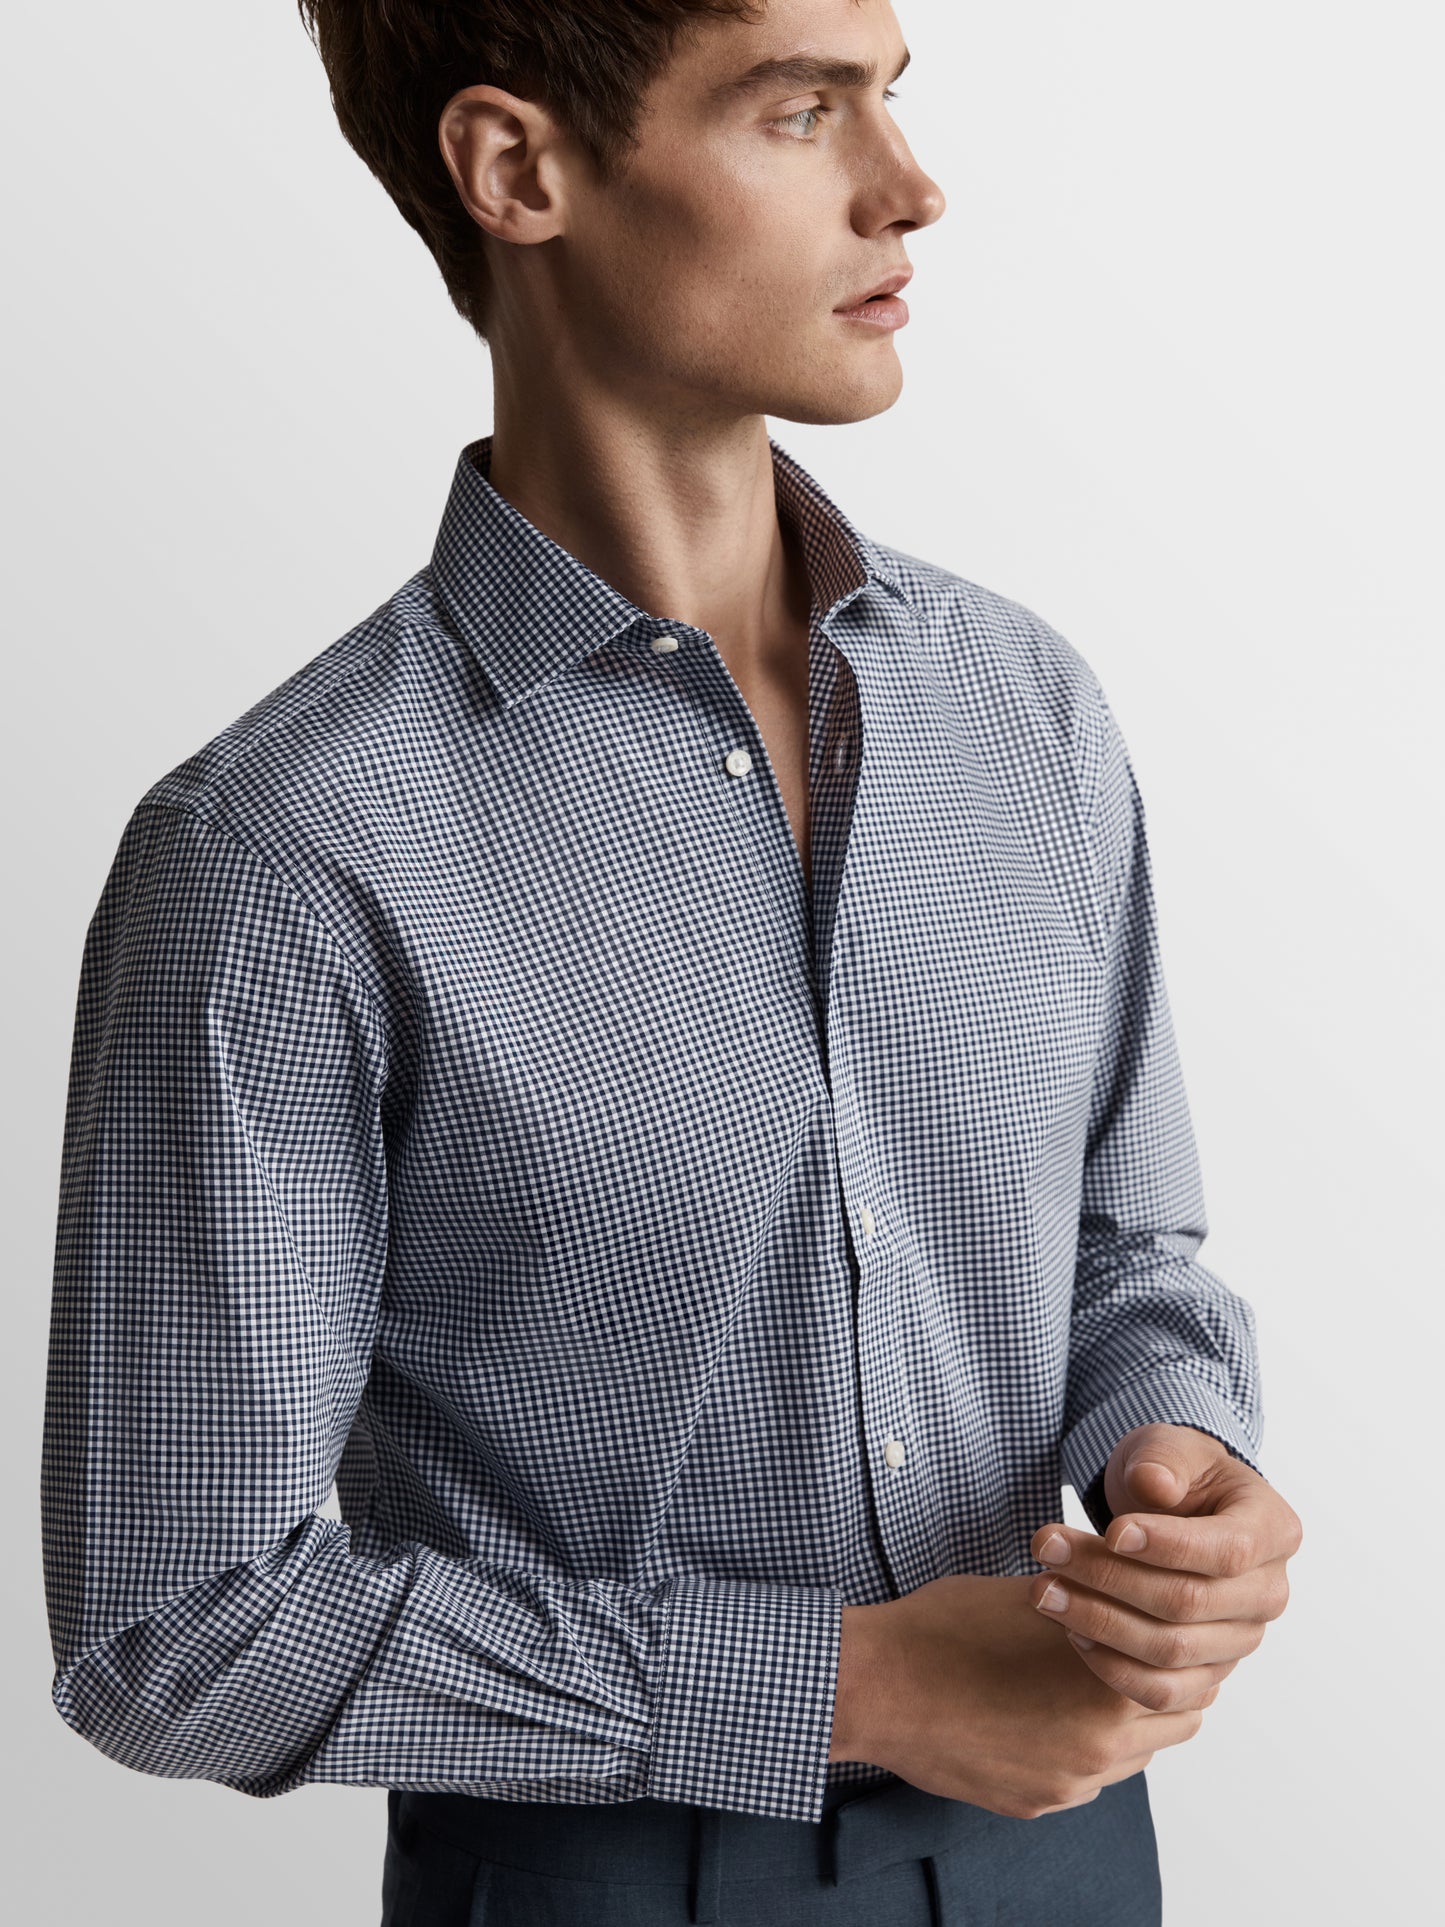 Image 2 of Max Performance Navy Blue Small Gingham Plain Weave Fitted Single Cuff Classic Collar Shirt